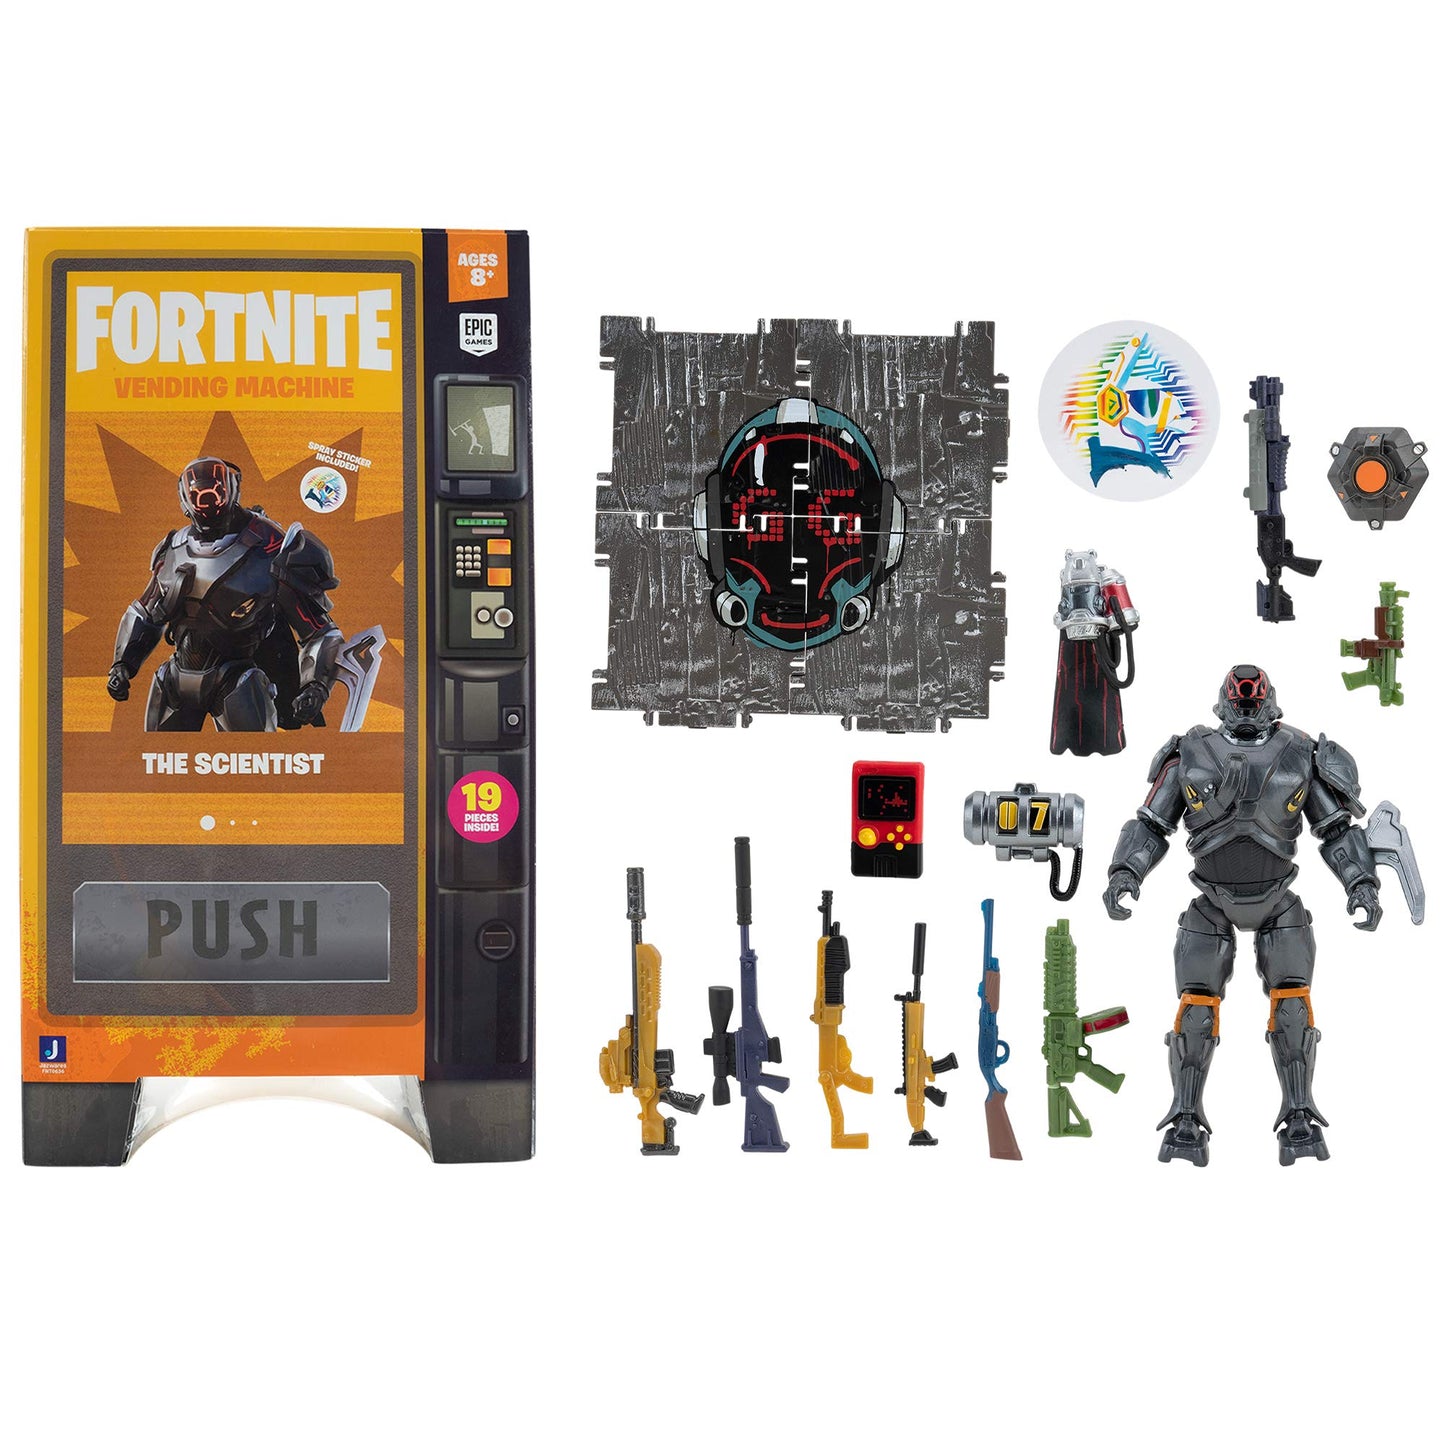 Fortnite FNT0636 Vending Machine, Includes Highly-Detailed and Articulated 4-inch The Scientist Figure, Weapons, Back Bling, Building Materials.